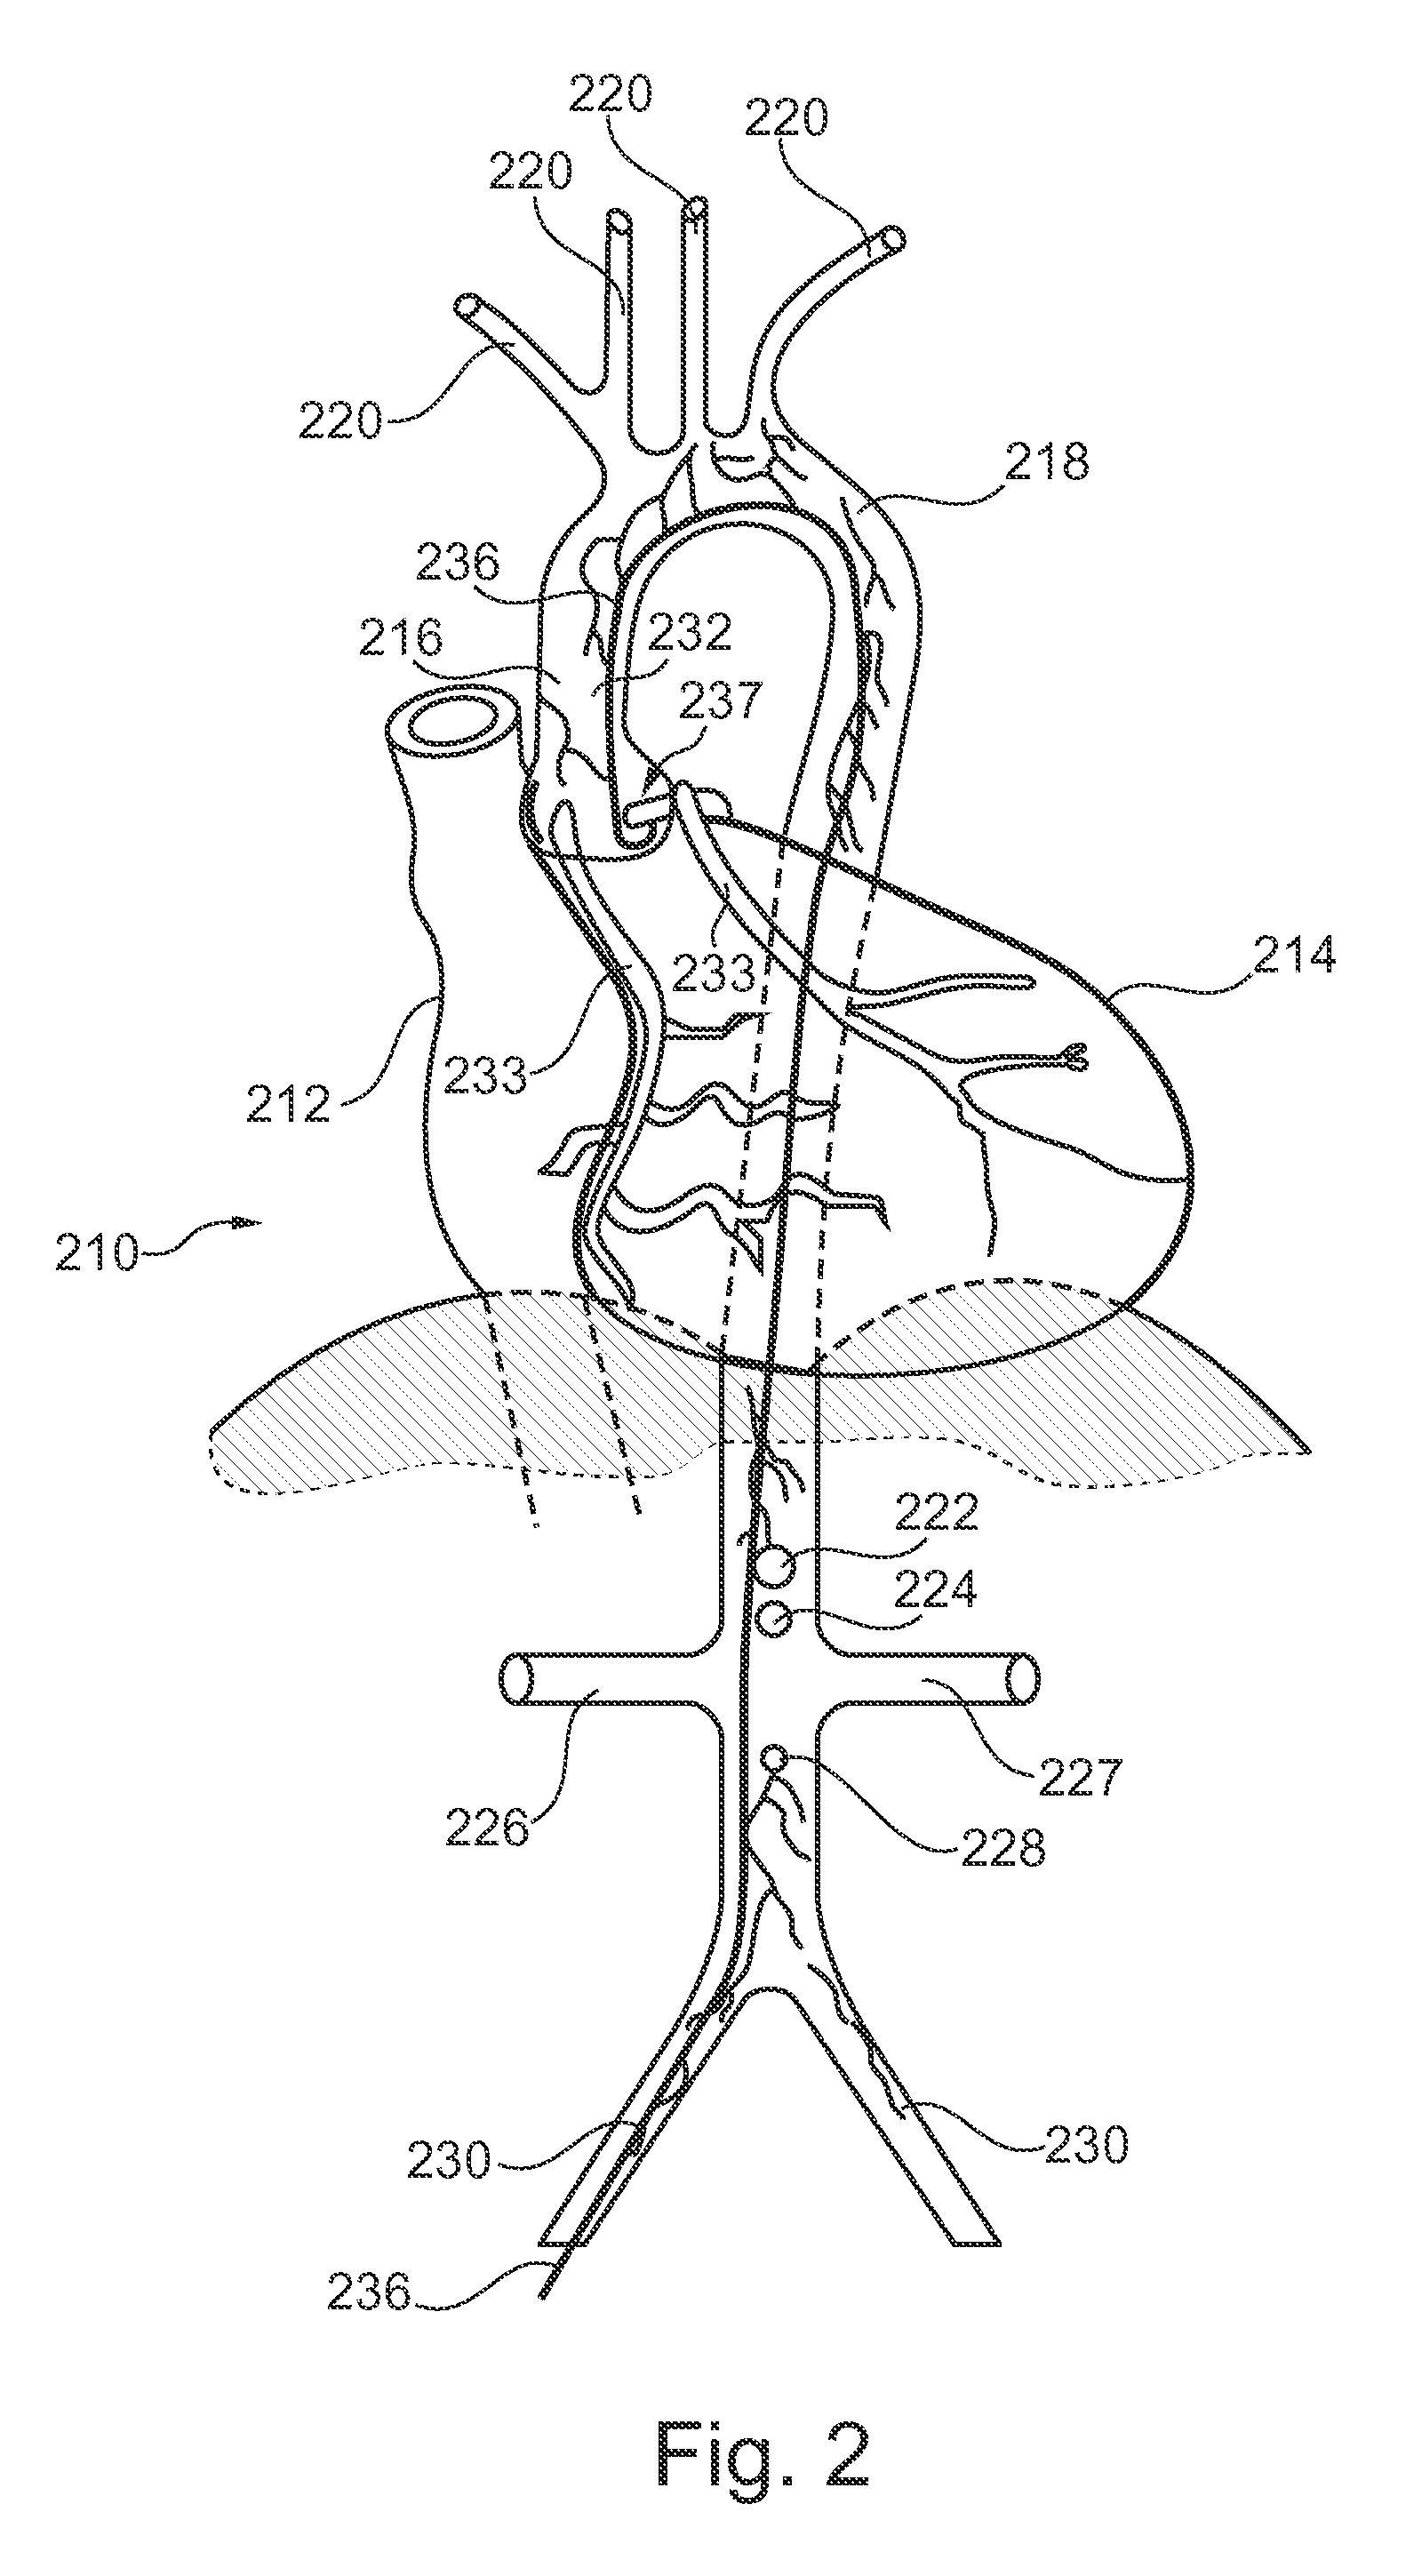 Image representation supporting the accurate positioning of an intervention device in vessel intervention procedures